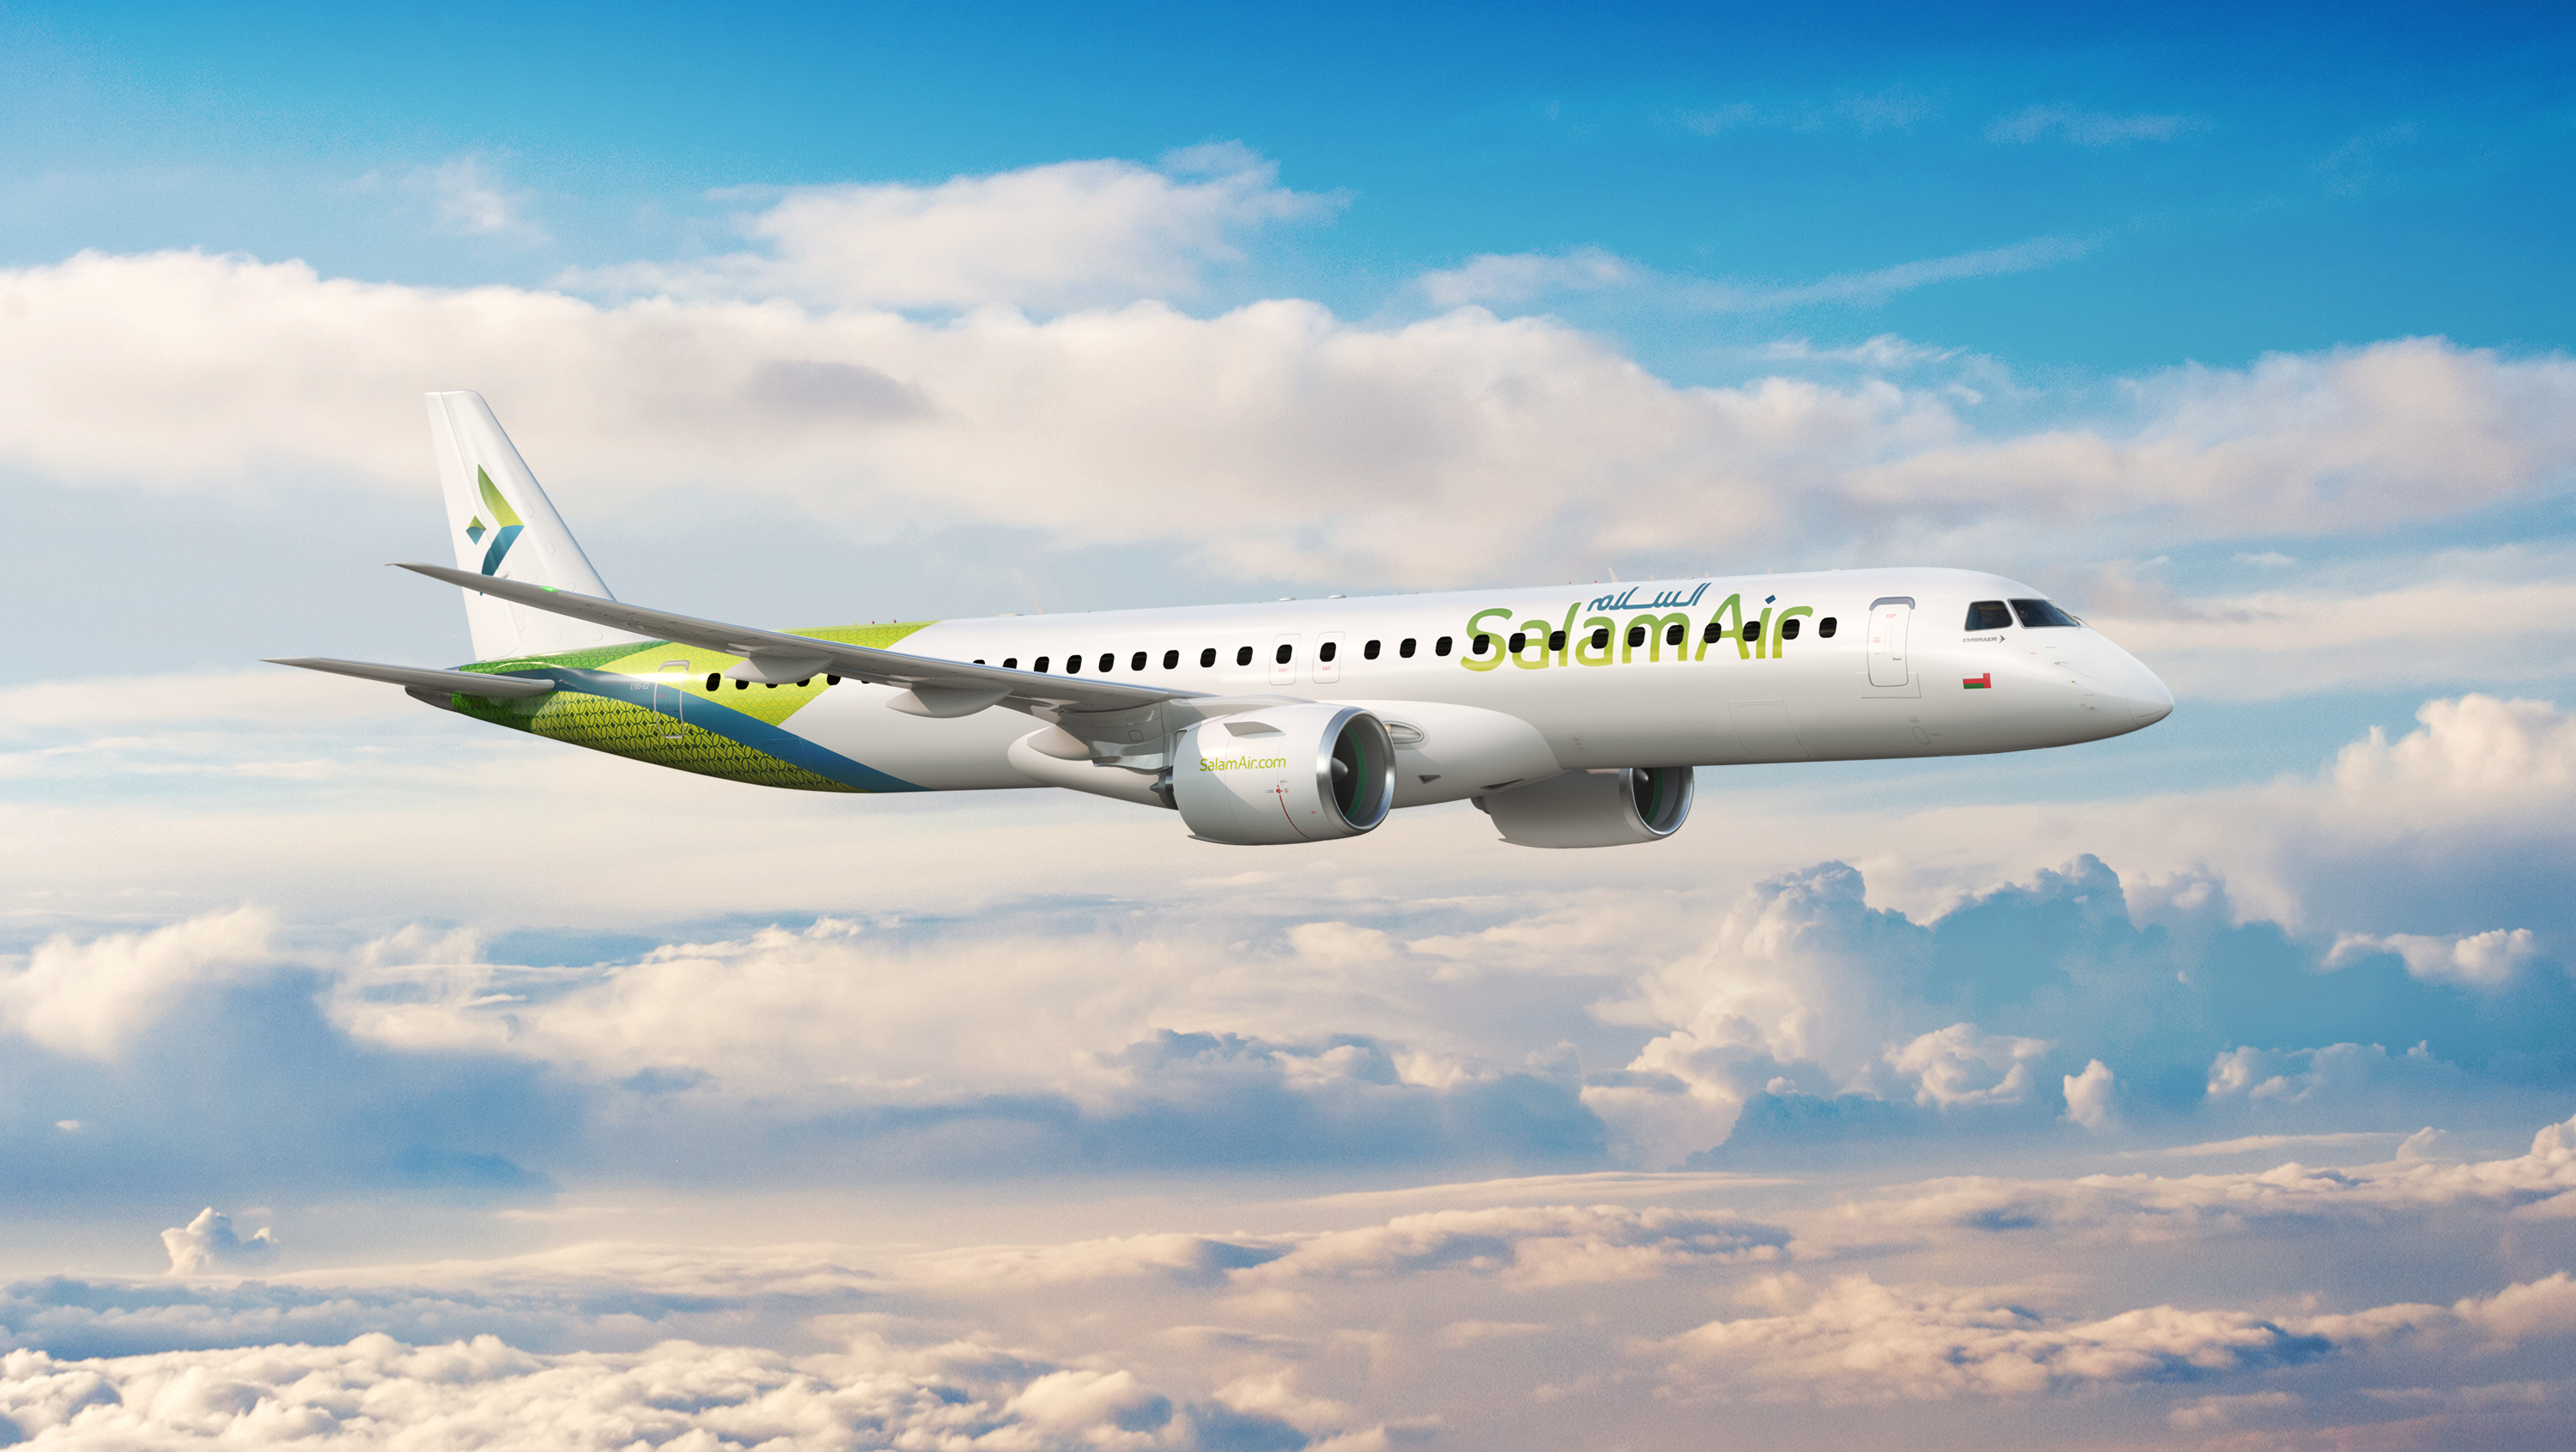 SalamAir chooses Embraer’s E195-E2 for next phase of its growth